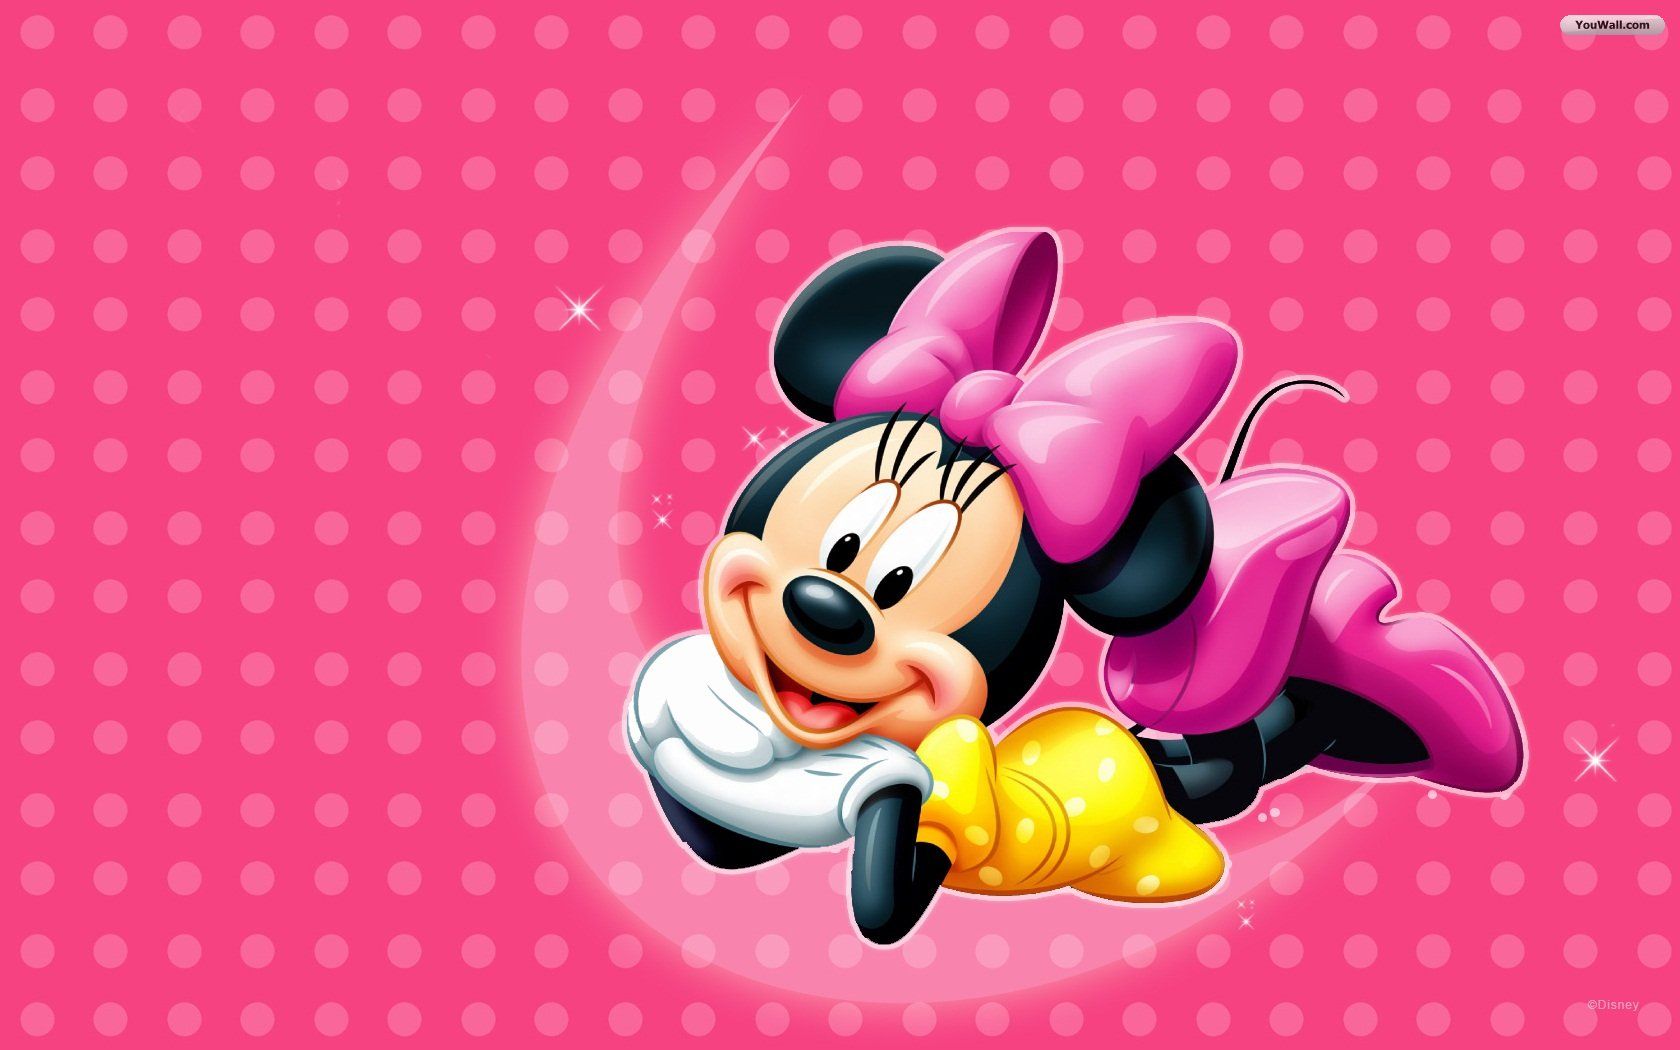 YouWall - Minnie Mouse Wallpaper - wallpaper,wallpapers,free ...